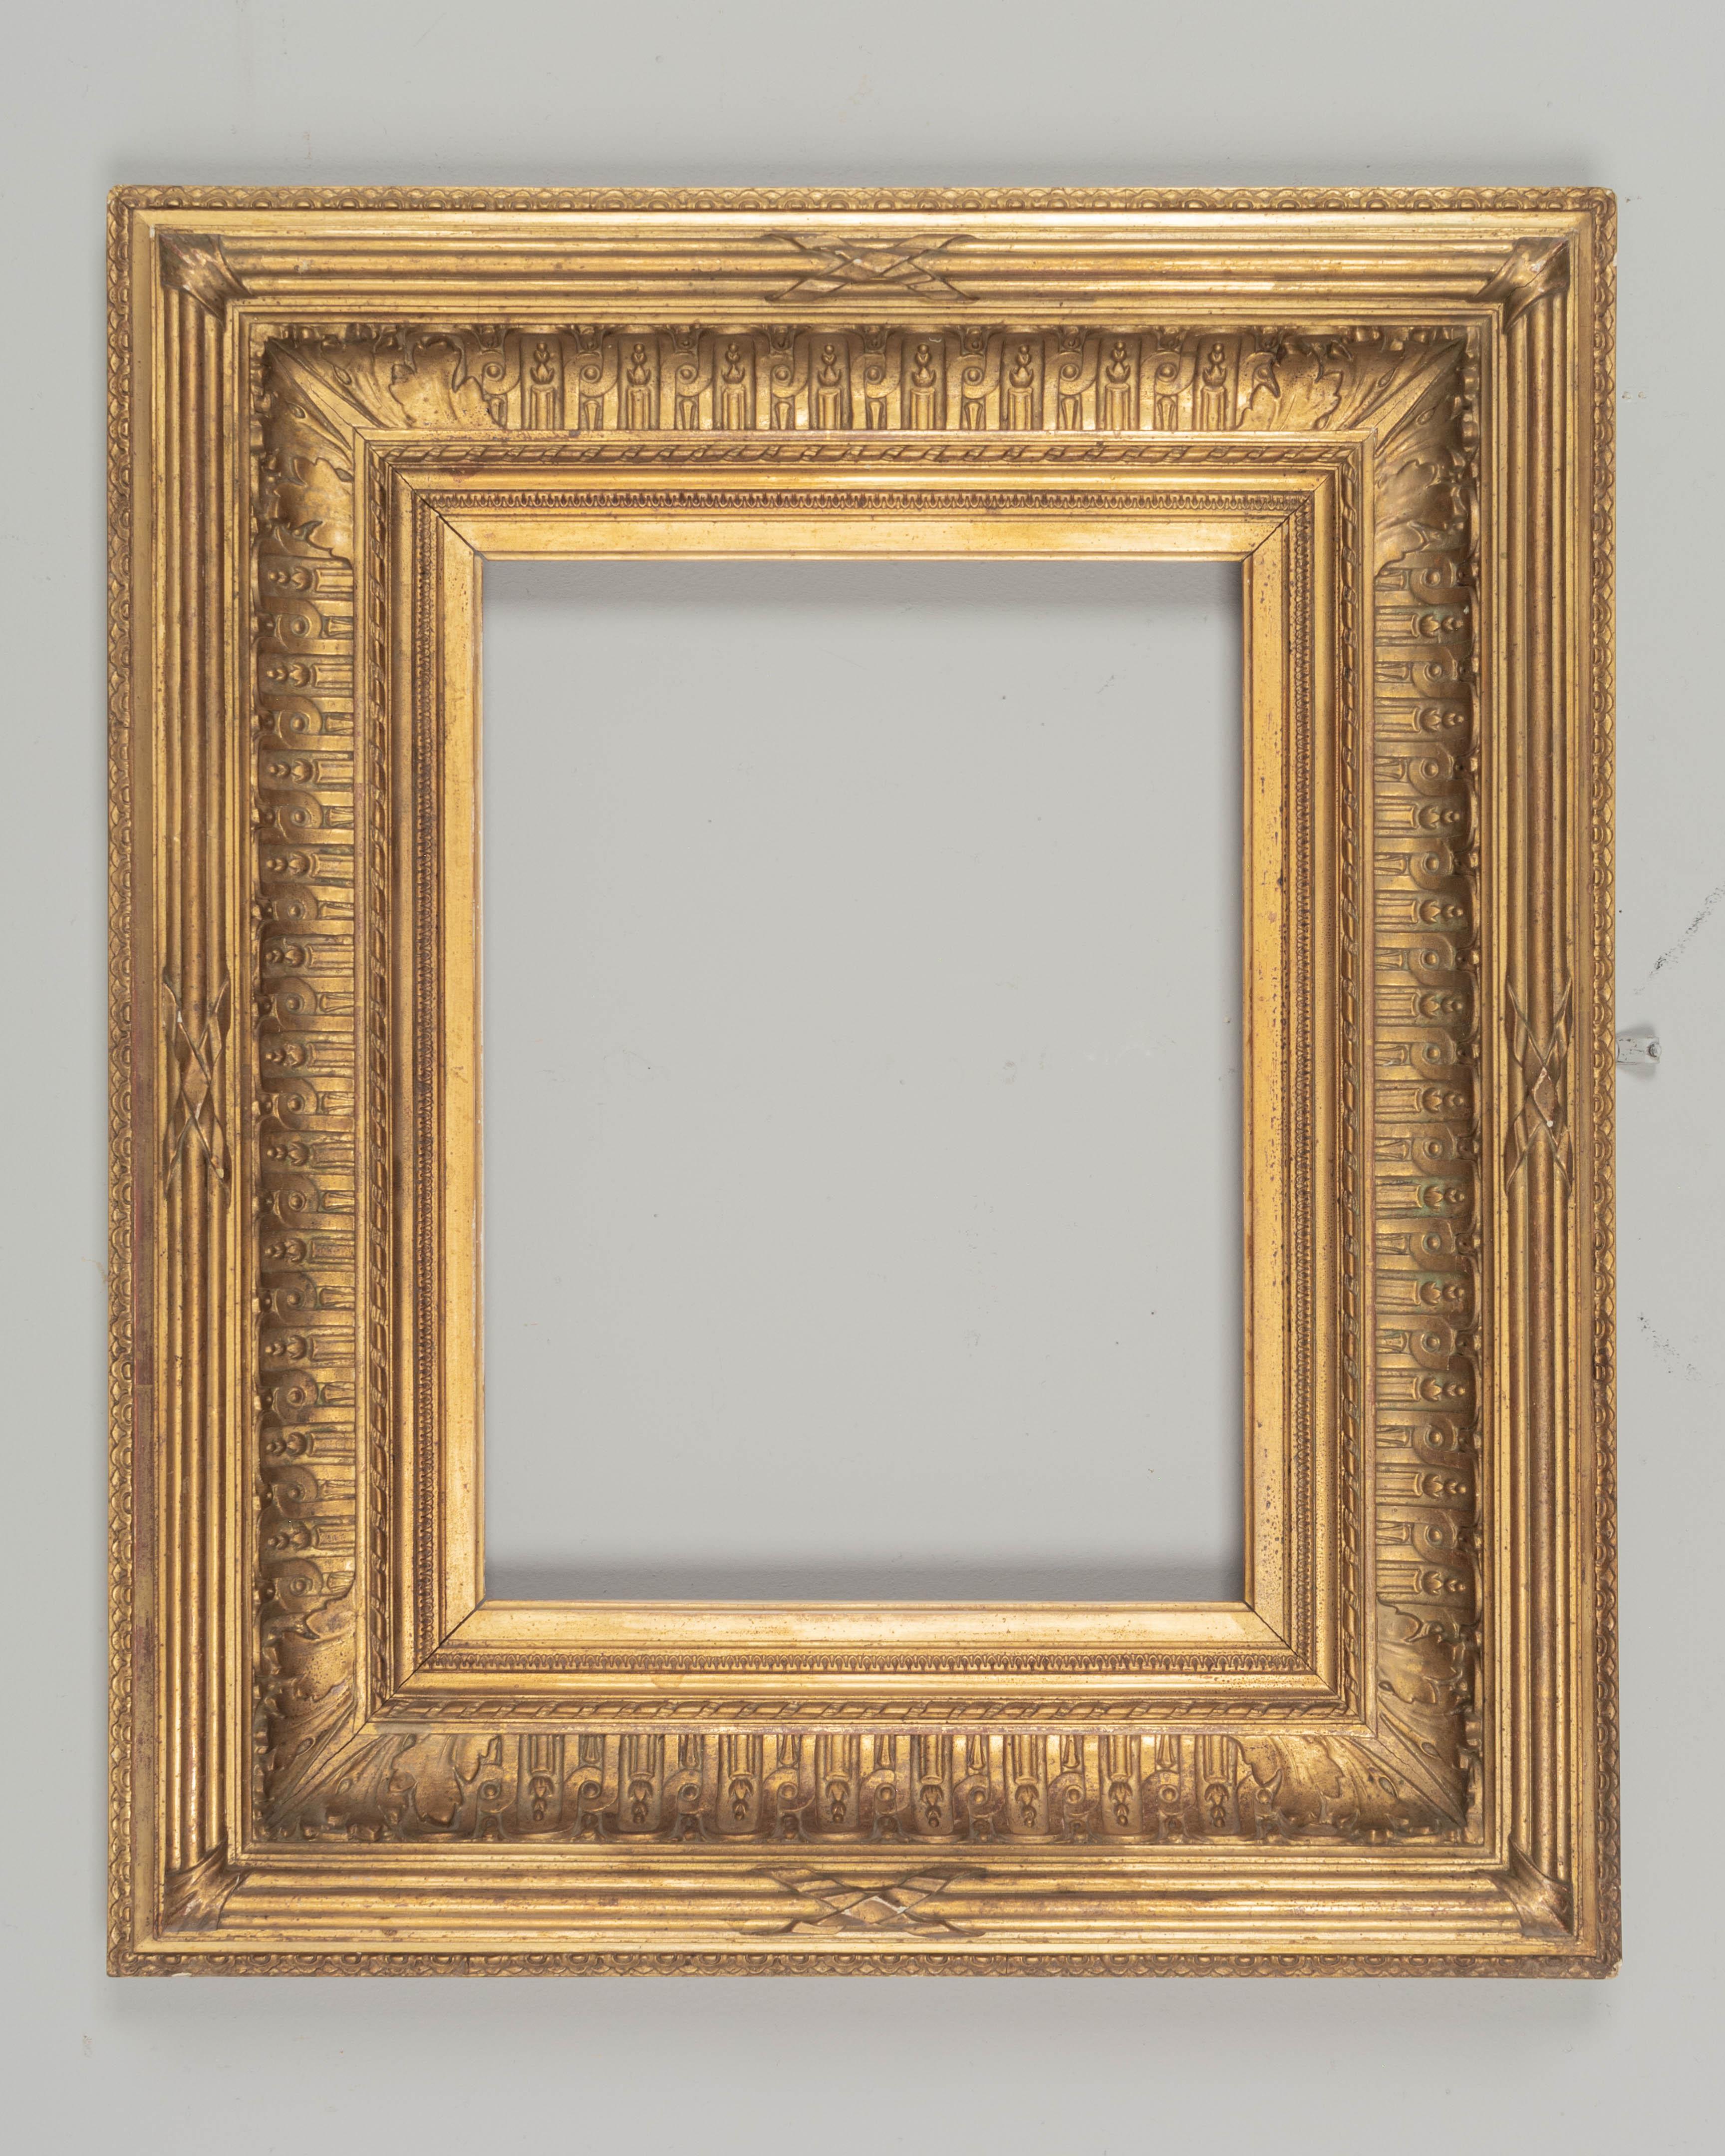 A 19th Century French Directoire style giltwood picture frame. Fine quality heavy molding with warm gilt finish. Very good condition with minor losses.  Nice scale for use as a mirror frame. Circa 1820-1840.
Outside dimensions: 21.25